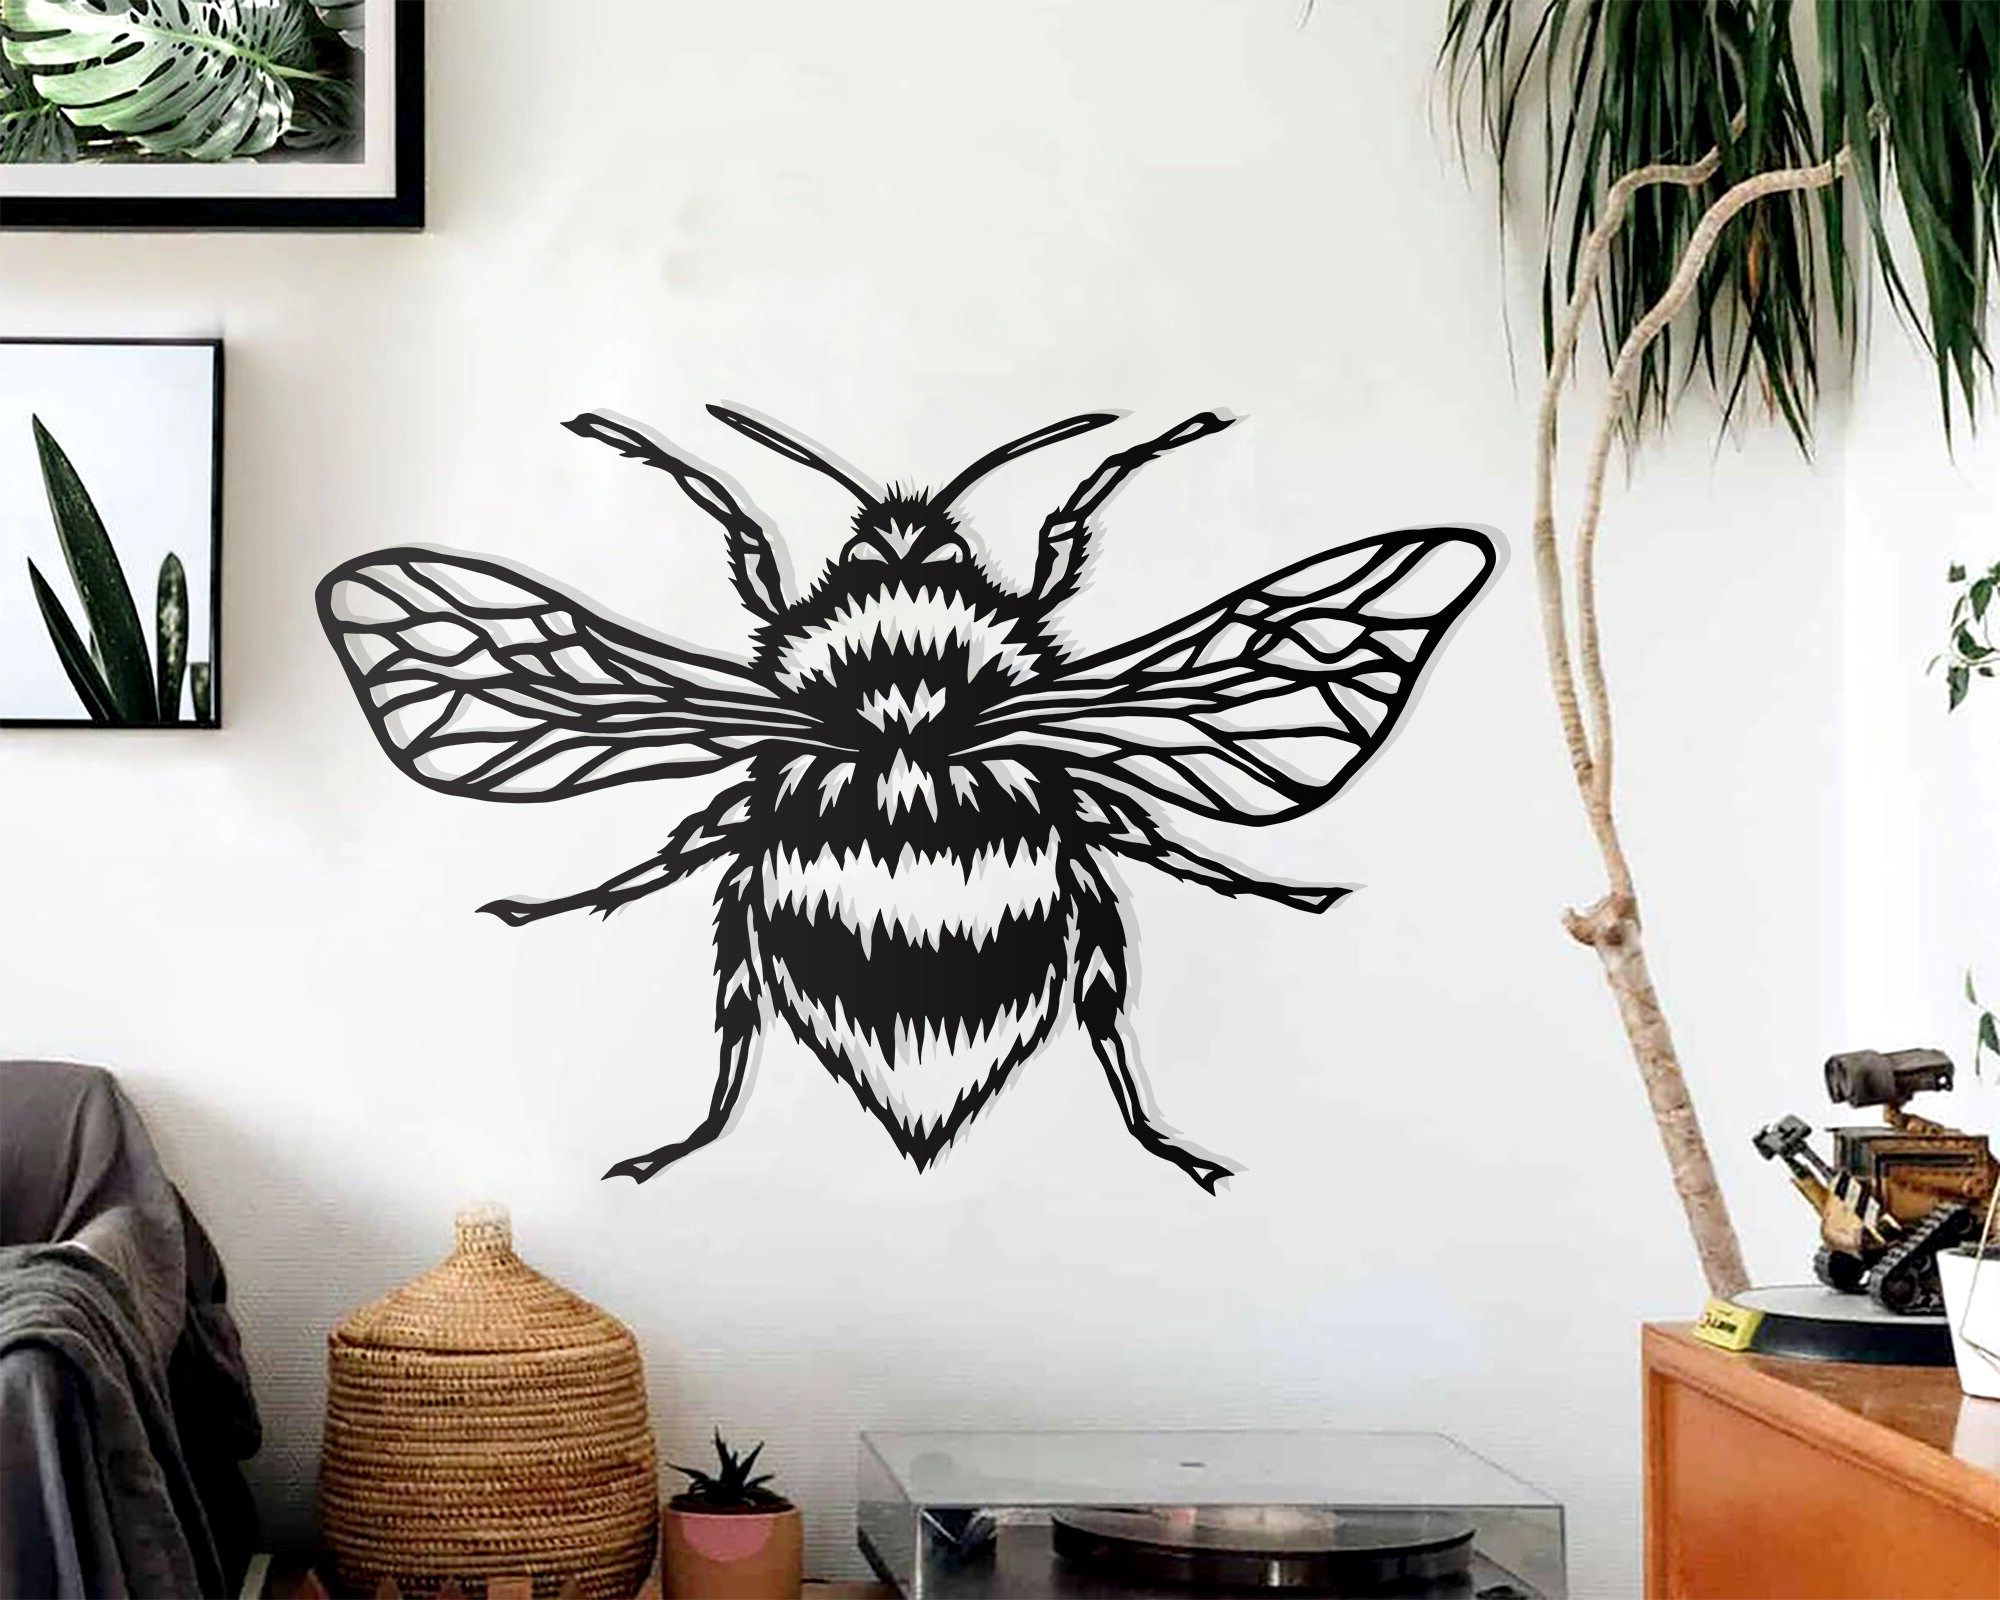 Bumble Bee Metal Wall Art Wall Decoration Living Room – Etsy Regarding Famous Metal Wall Bumble Bee Wall Art (View 11 of 15)